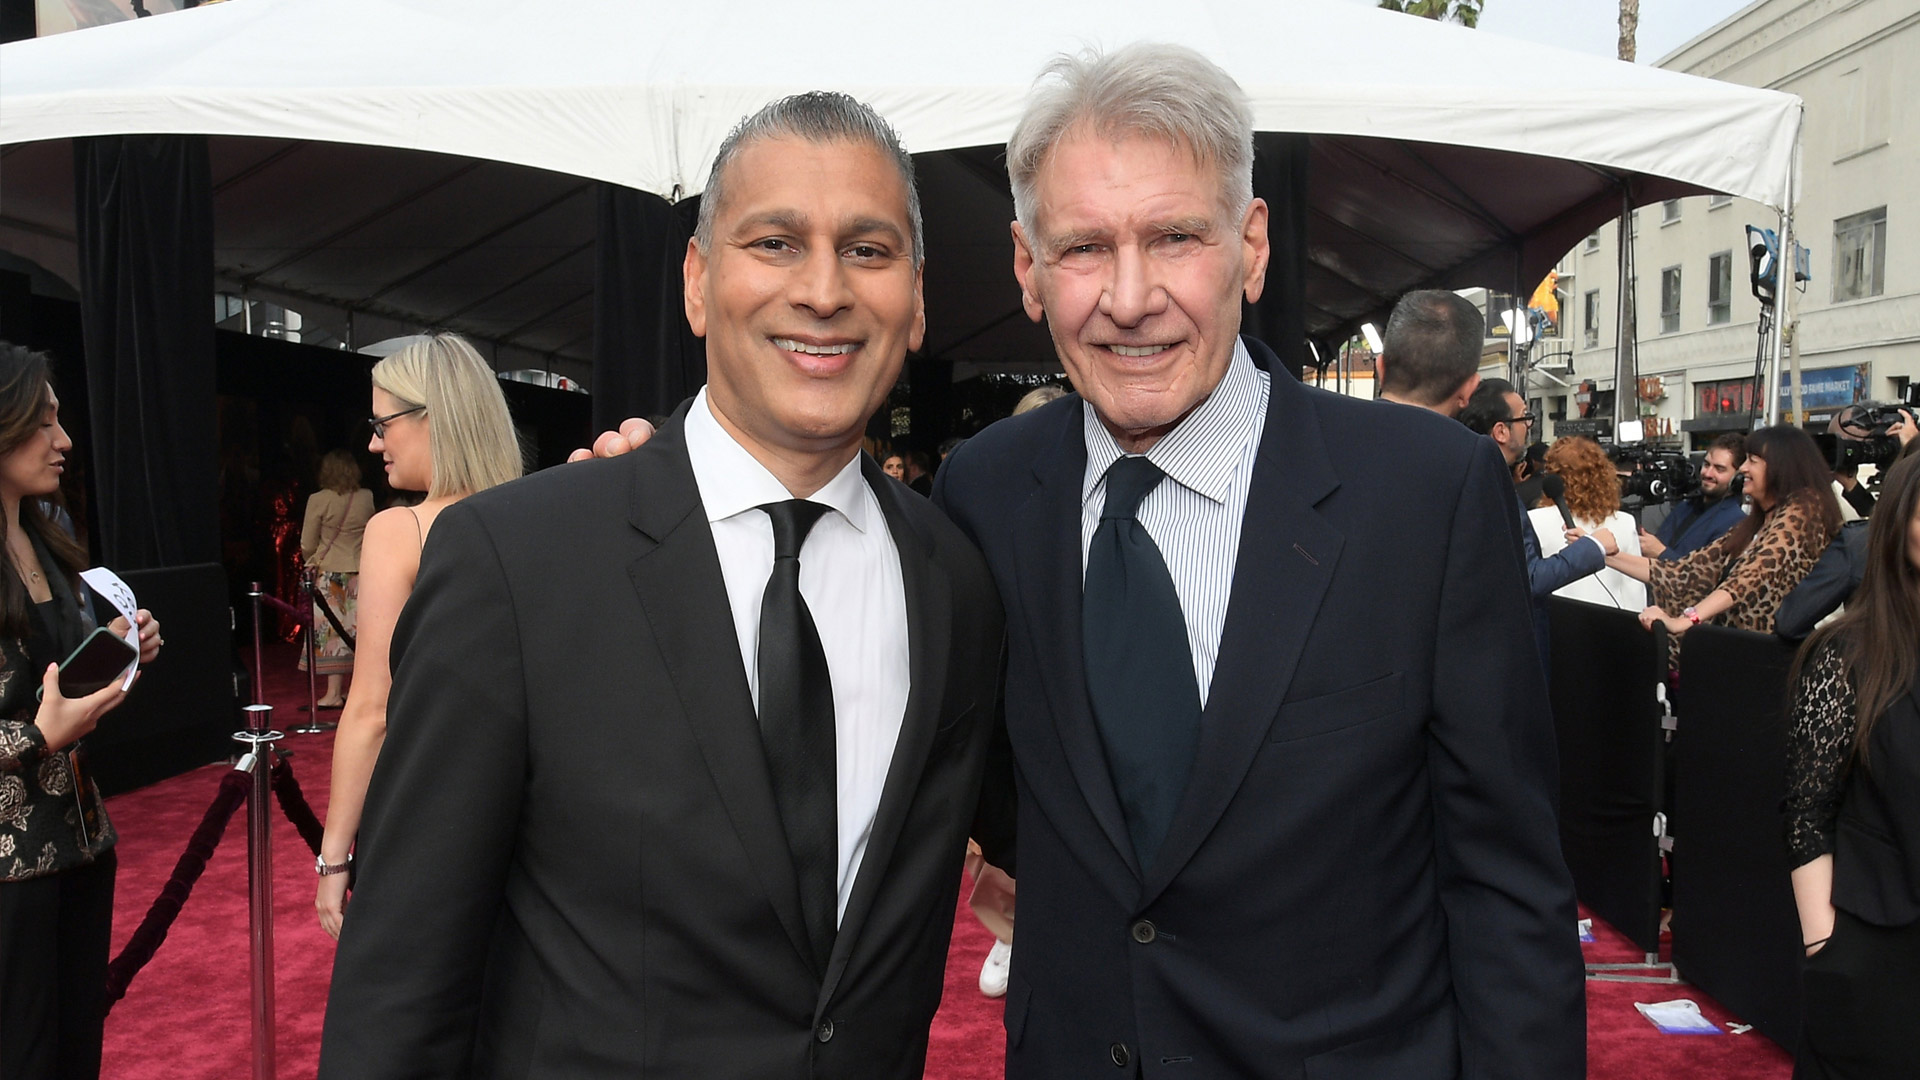 Harrison Ford and Raj Singh at the U.S. premiere red carpet